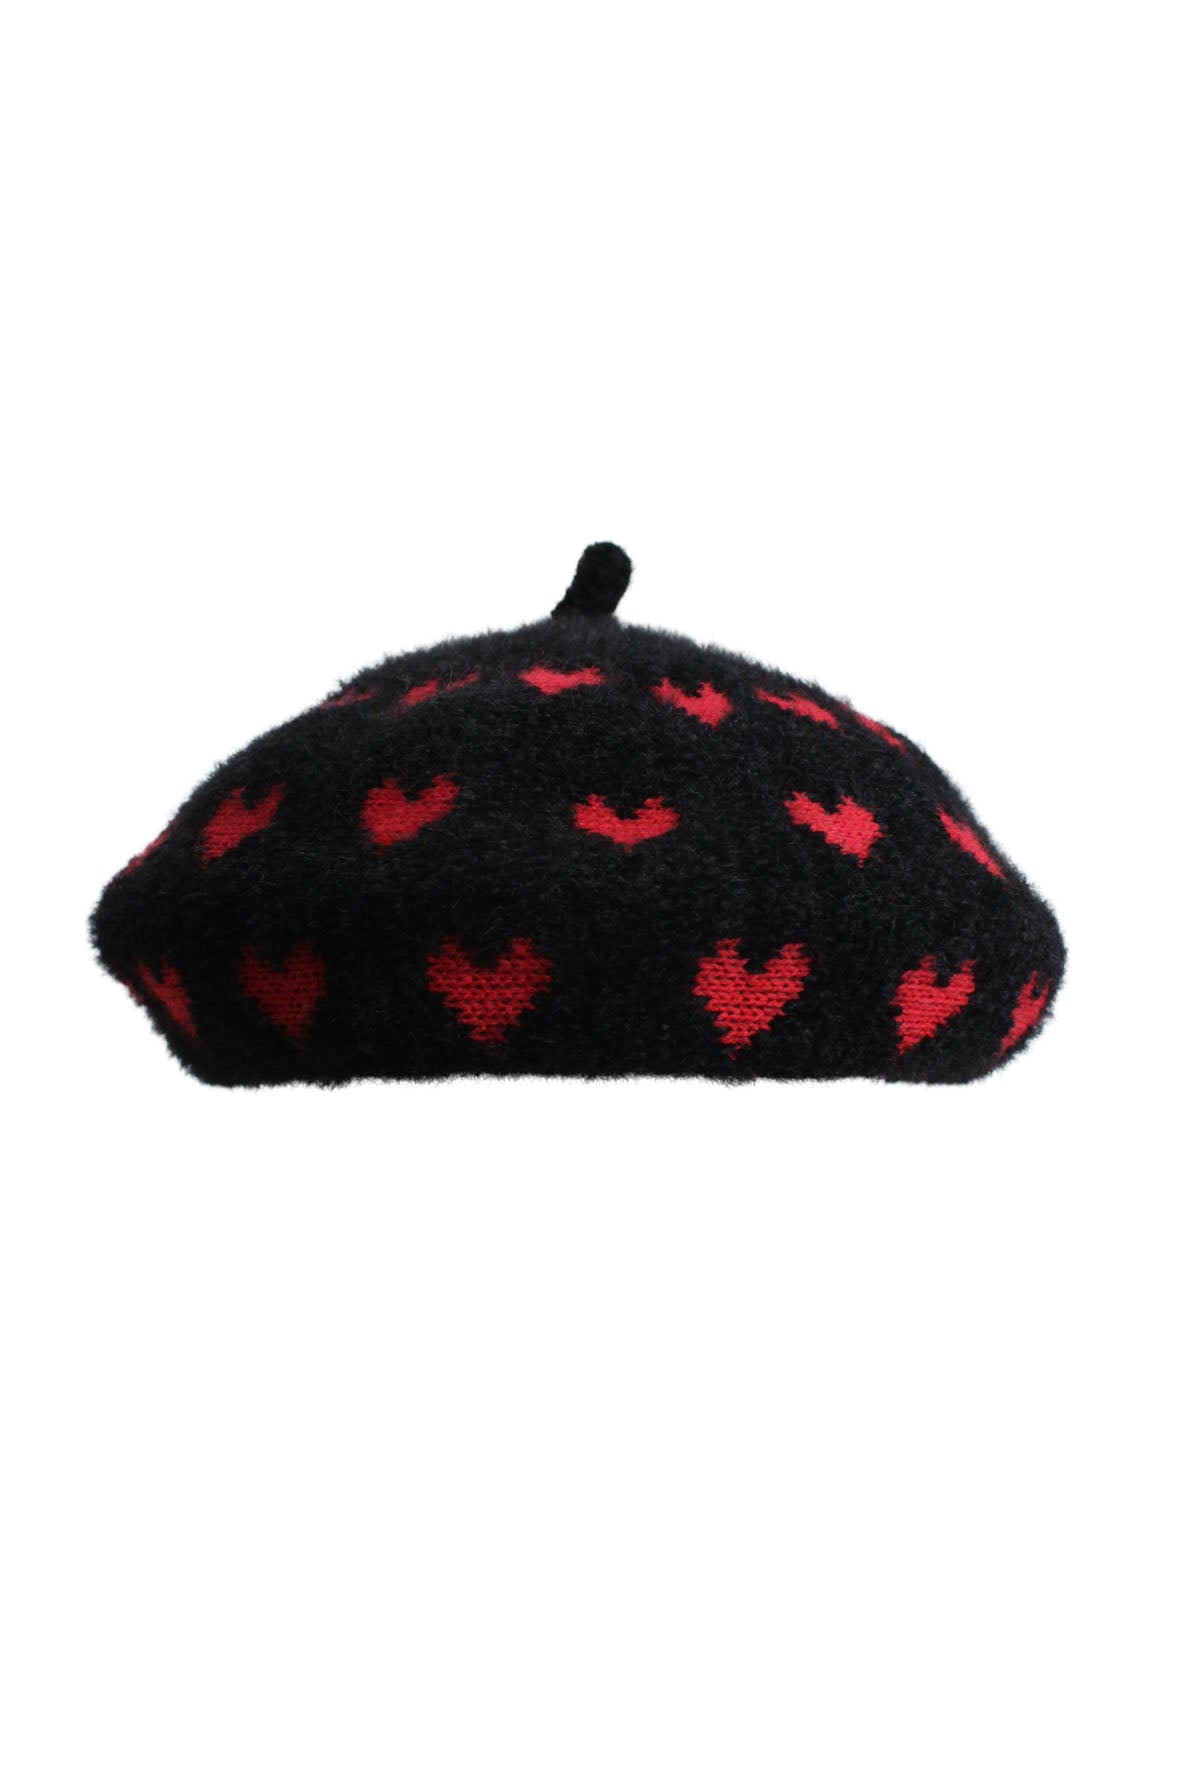 description: maeve by anthropologie black and red heart beanie. features black knit throughout and drawstring adjustable. 